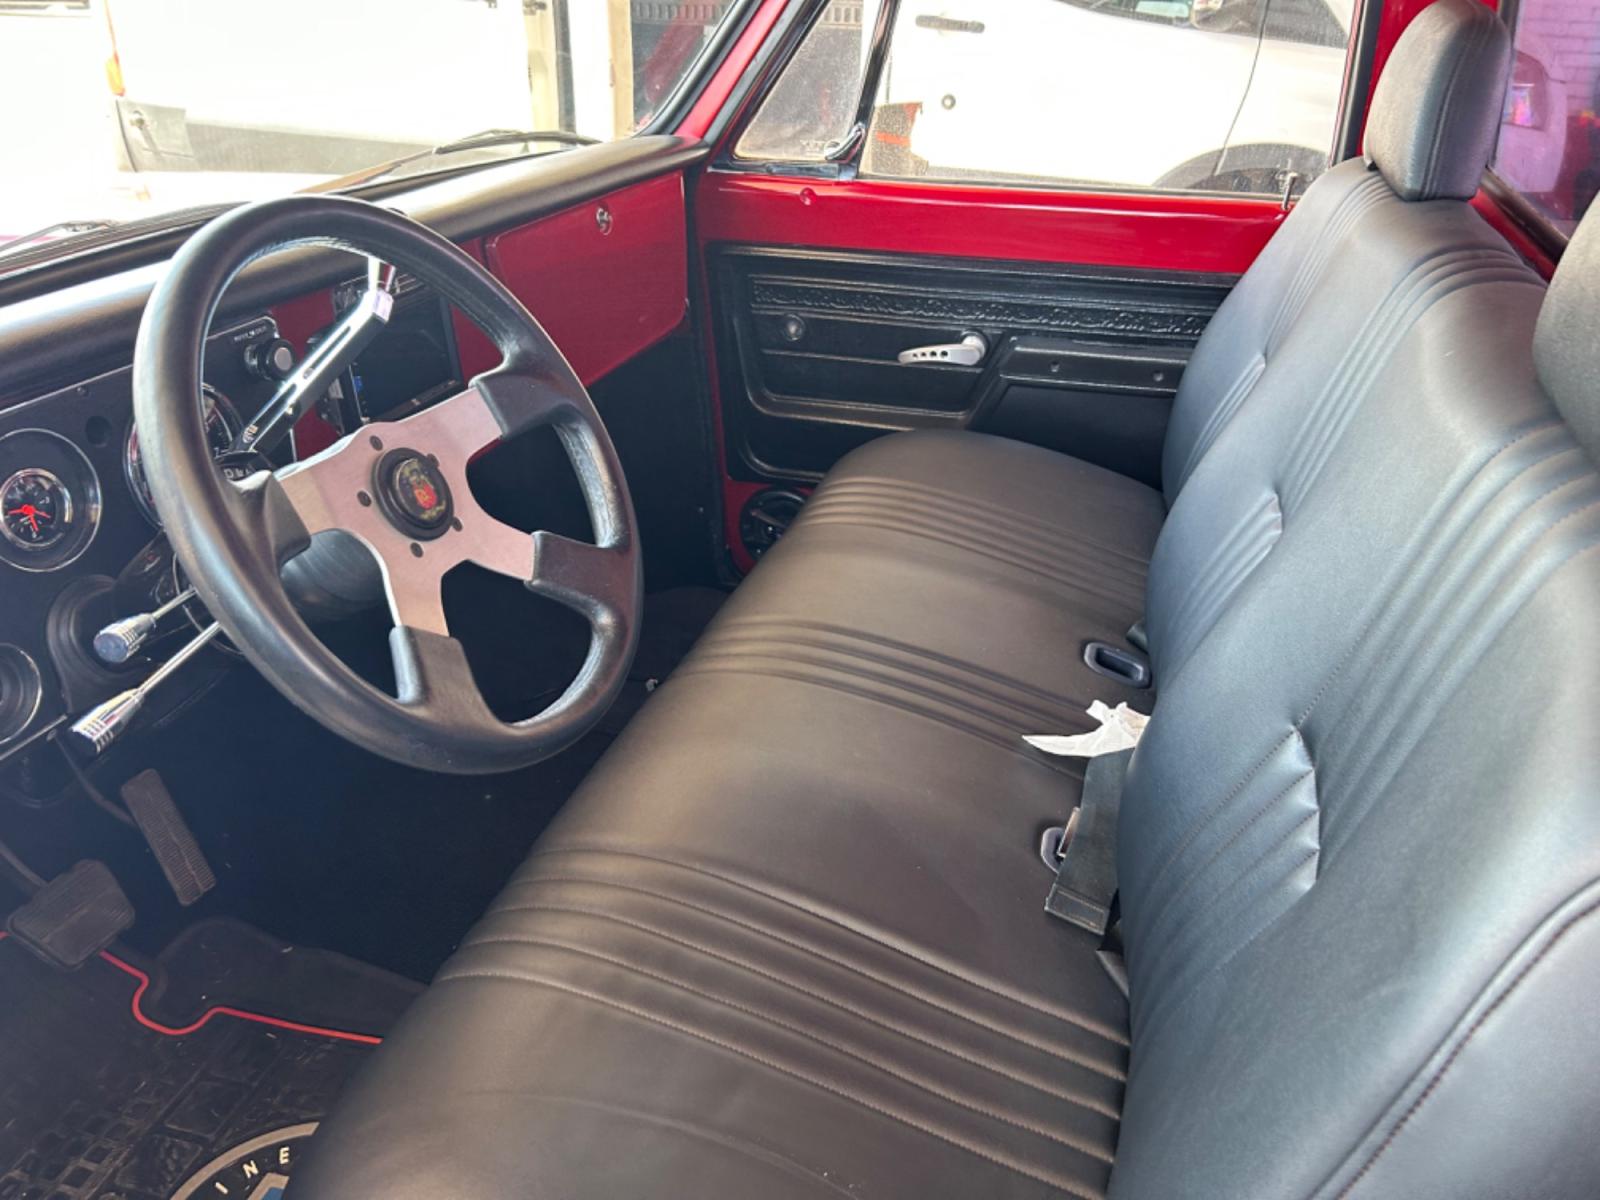 1972 Red Chevrolet C10 (CCE142A1201) , Automatic transmission, located at 1687 Business 35 S, New Braunfels, TX, 78130, (830) 625-7159, 29.655487, -98.051491 - 580 Horse Power - Photo #10